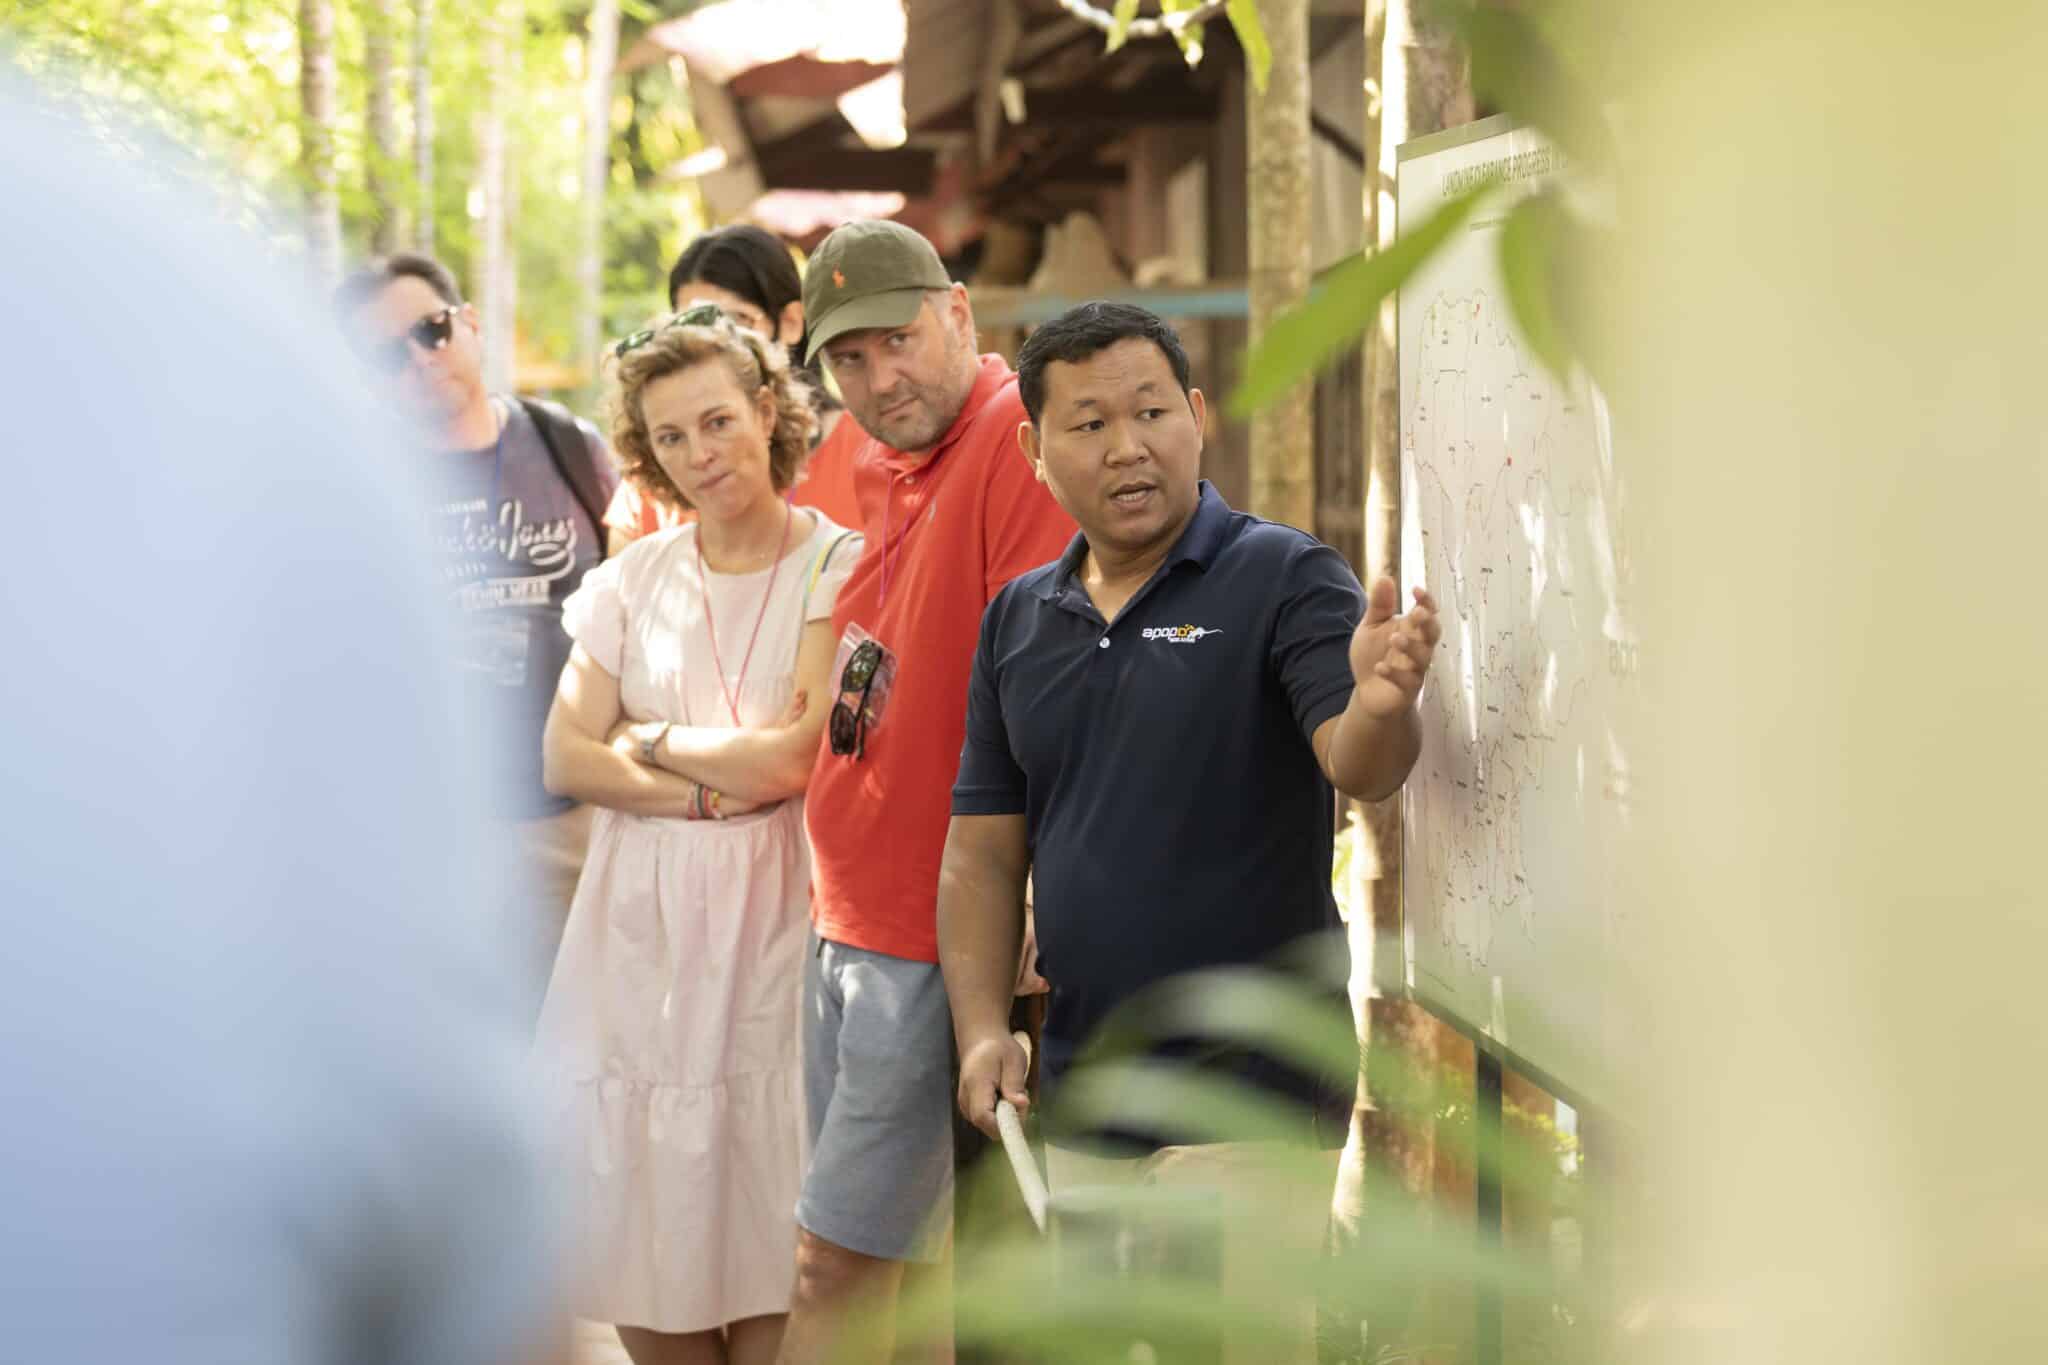 Sambat gives a guided tour at the Visitor Center in Siem Reap